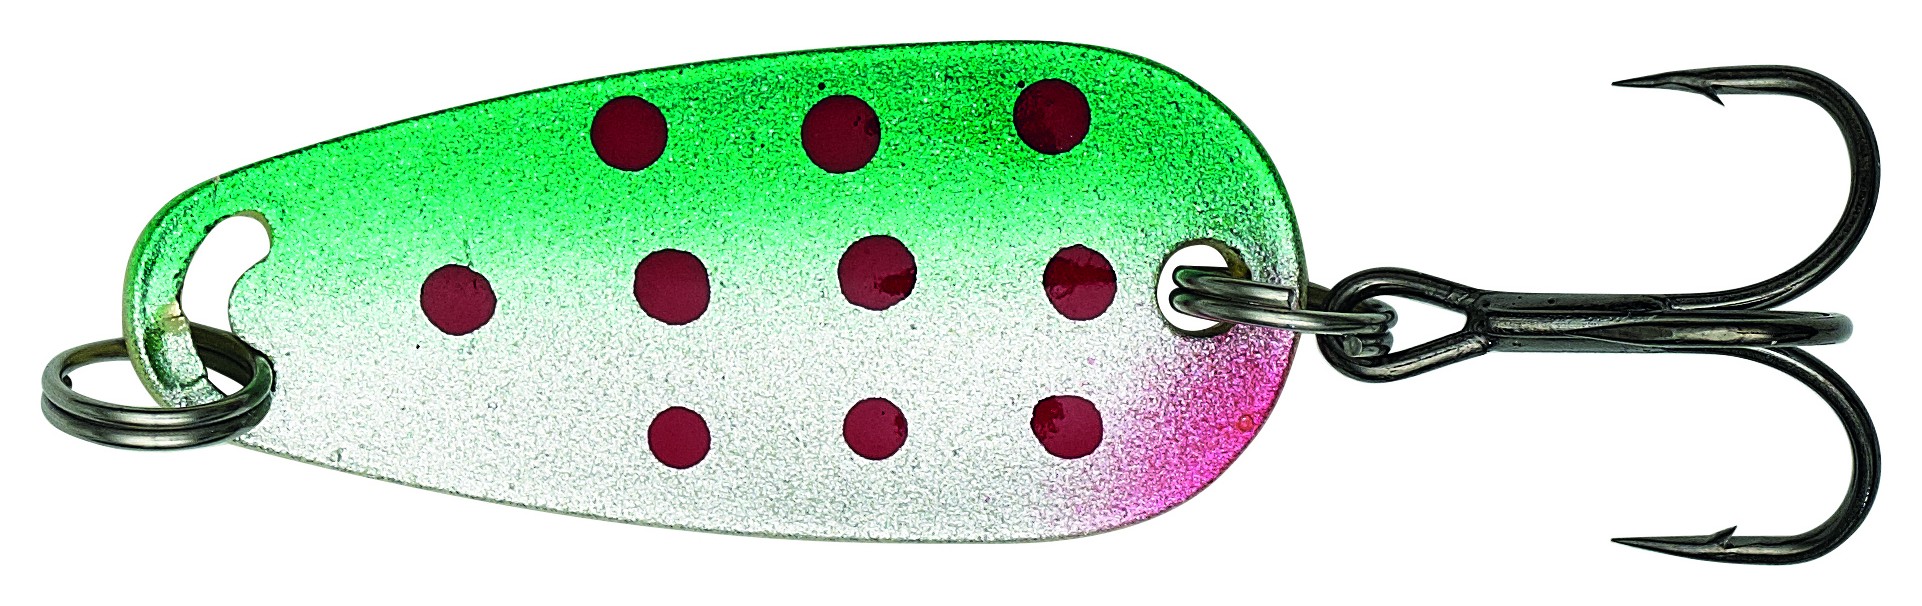 Trout Spoon Kinetic Volda Green & Silver